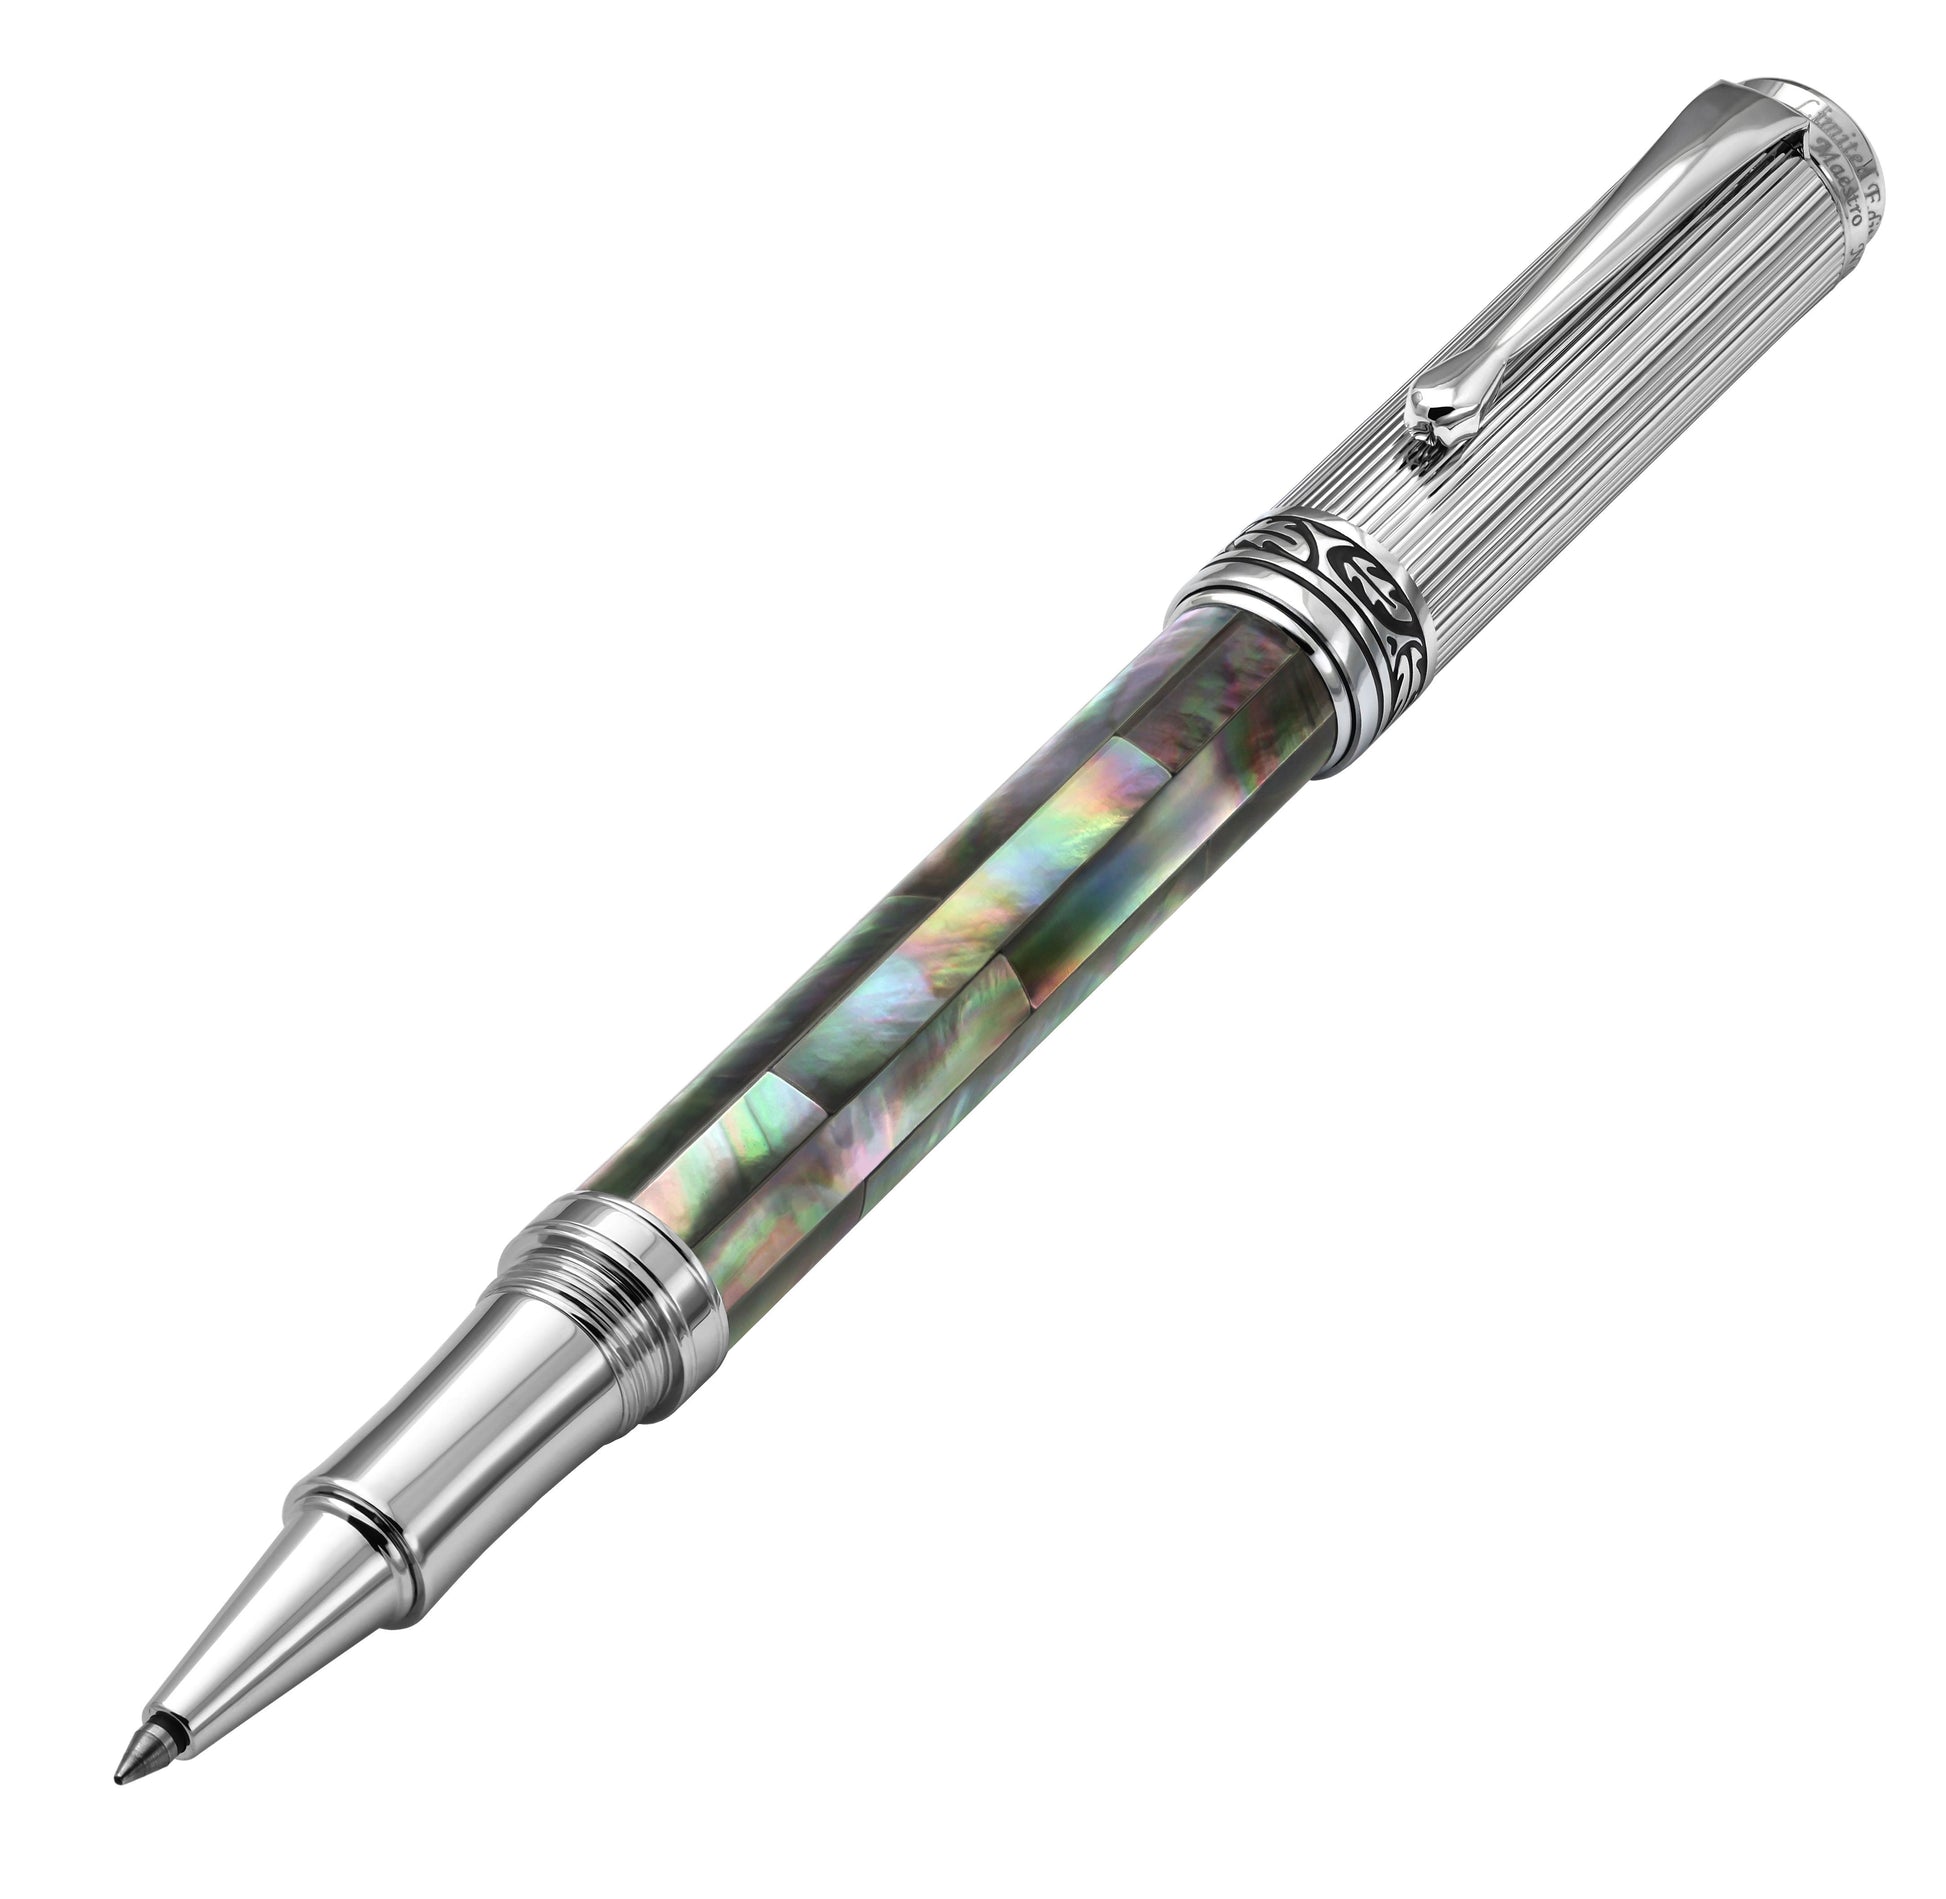 Angled front view of the Maestro Black MOP Chrome R rollerball pen, with the cap posted on the end of the barrel